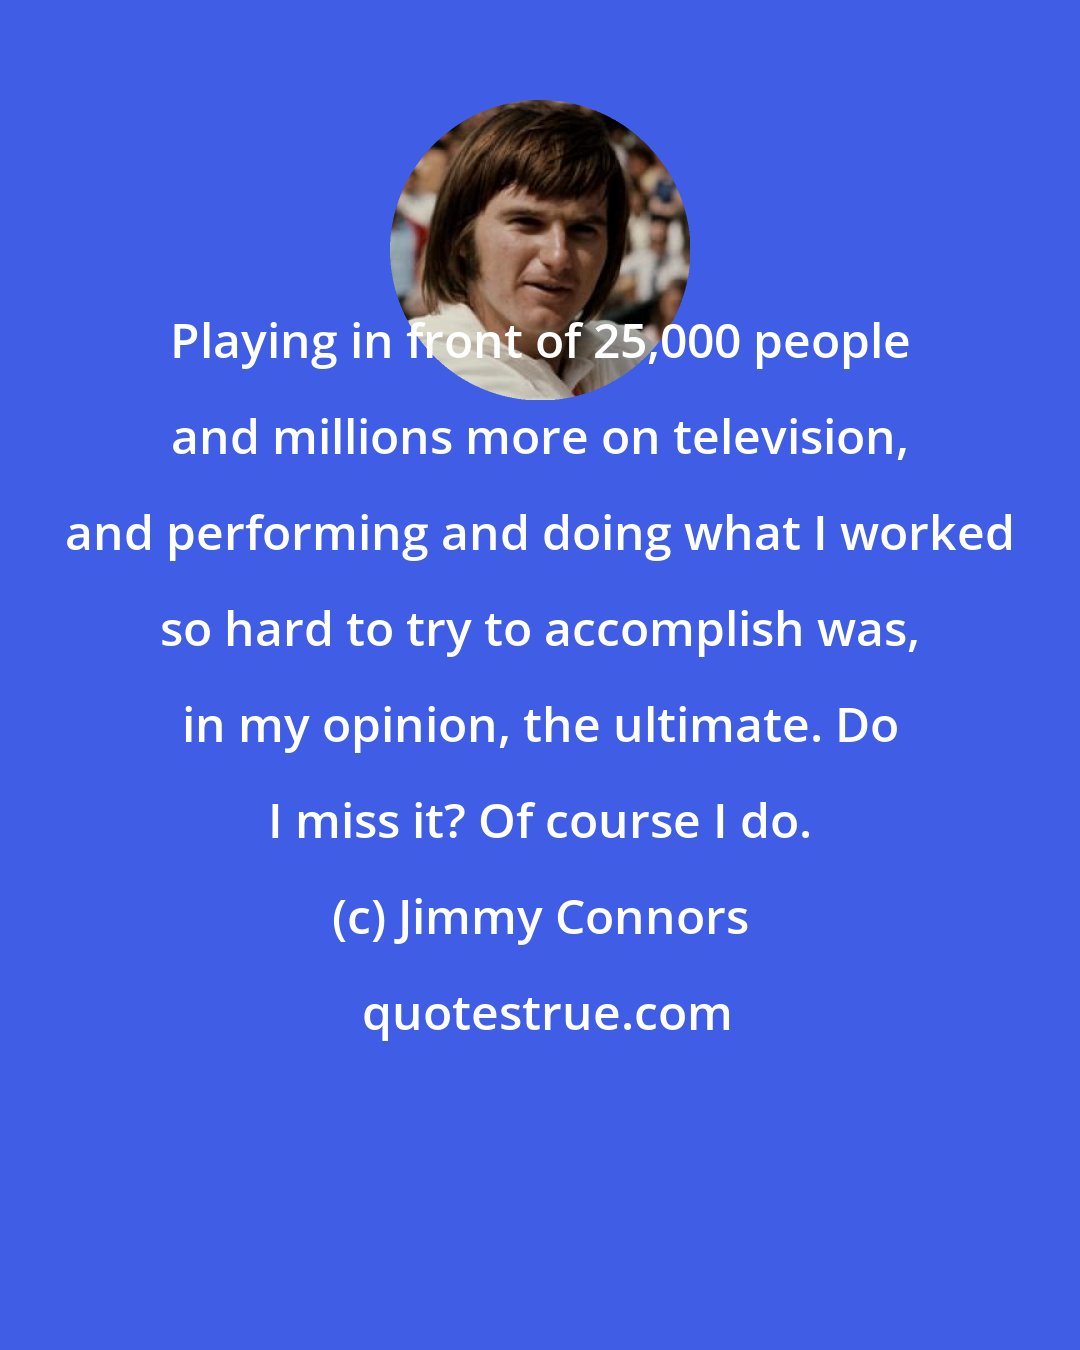 Jimmy Connors: Playing in front of 25,000 people and millions more on television, and performing and doing what I worked so hard to try to accomplish was, in my opinion, the ultimate. Do I miss it? Of course I do.